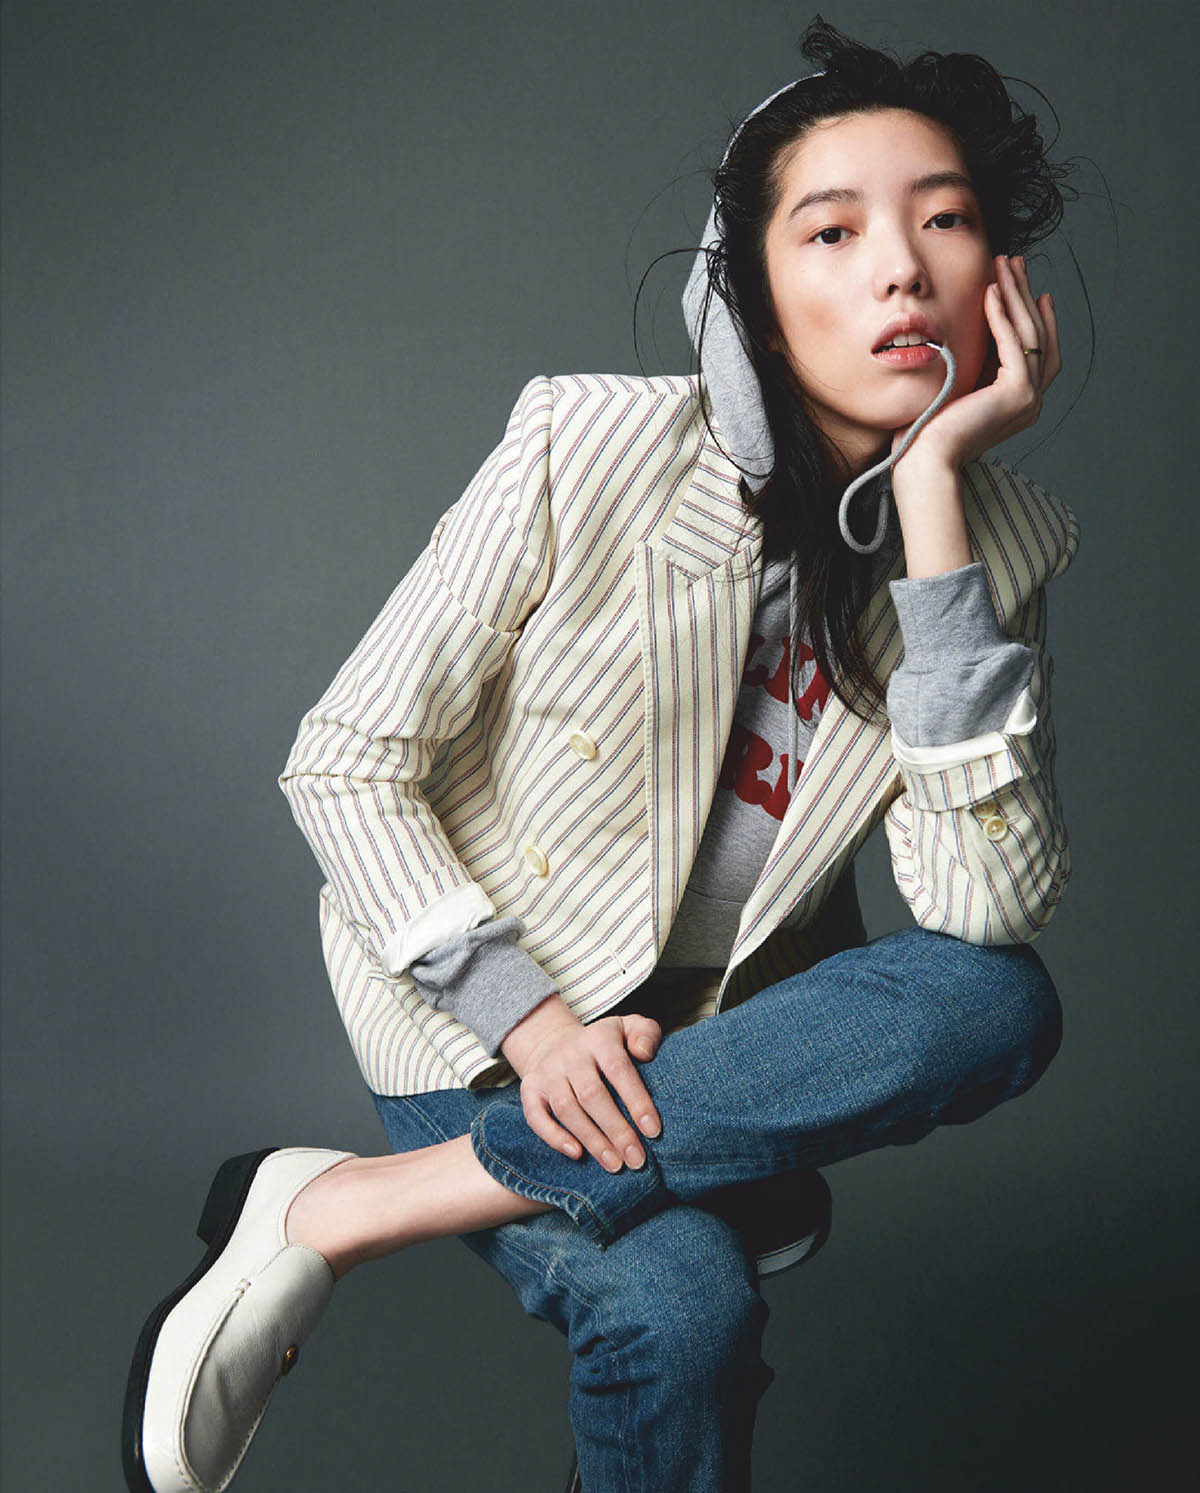 Jessie Hsu by Cheng Po Ou Yang for Vogue Taiwan February 2021